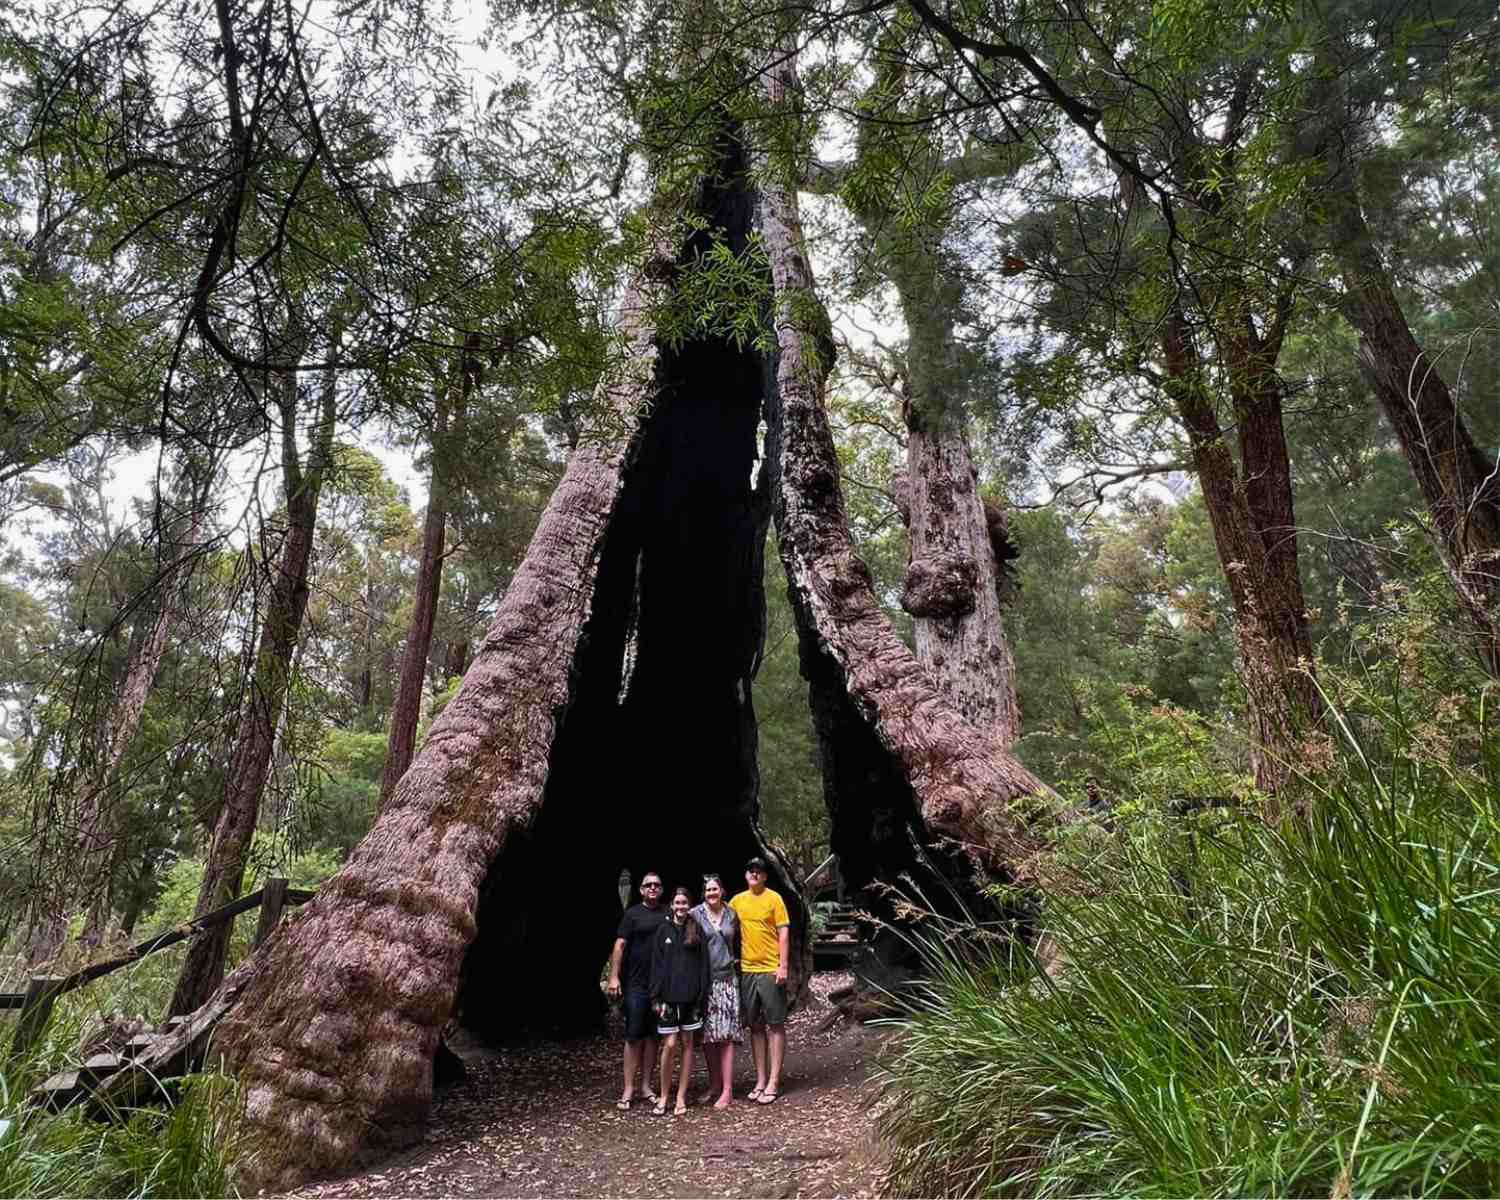 Our family inside the Giant Tingle Tree in WA